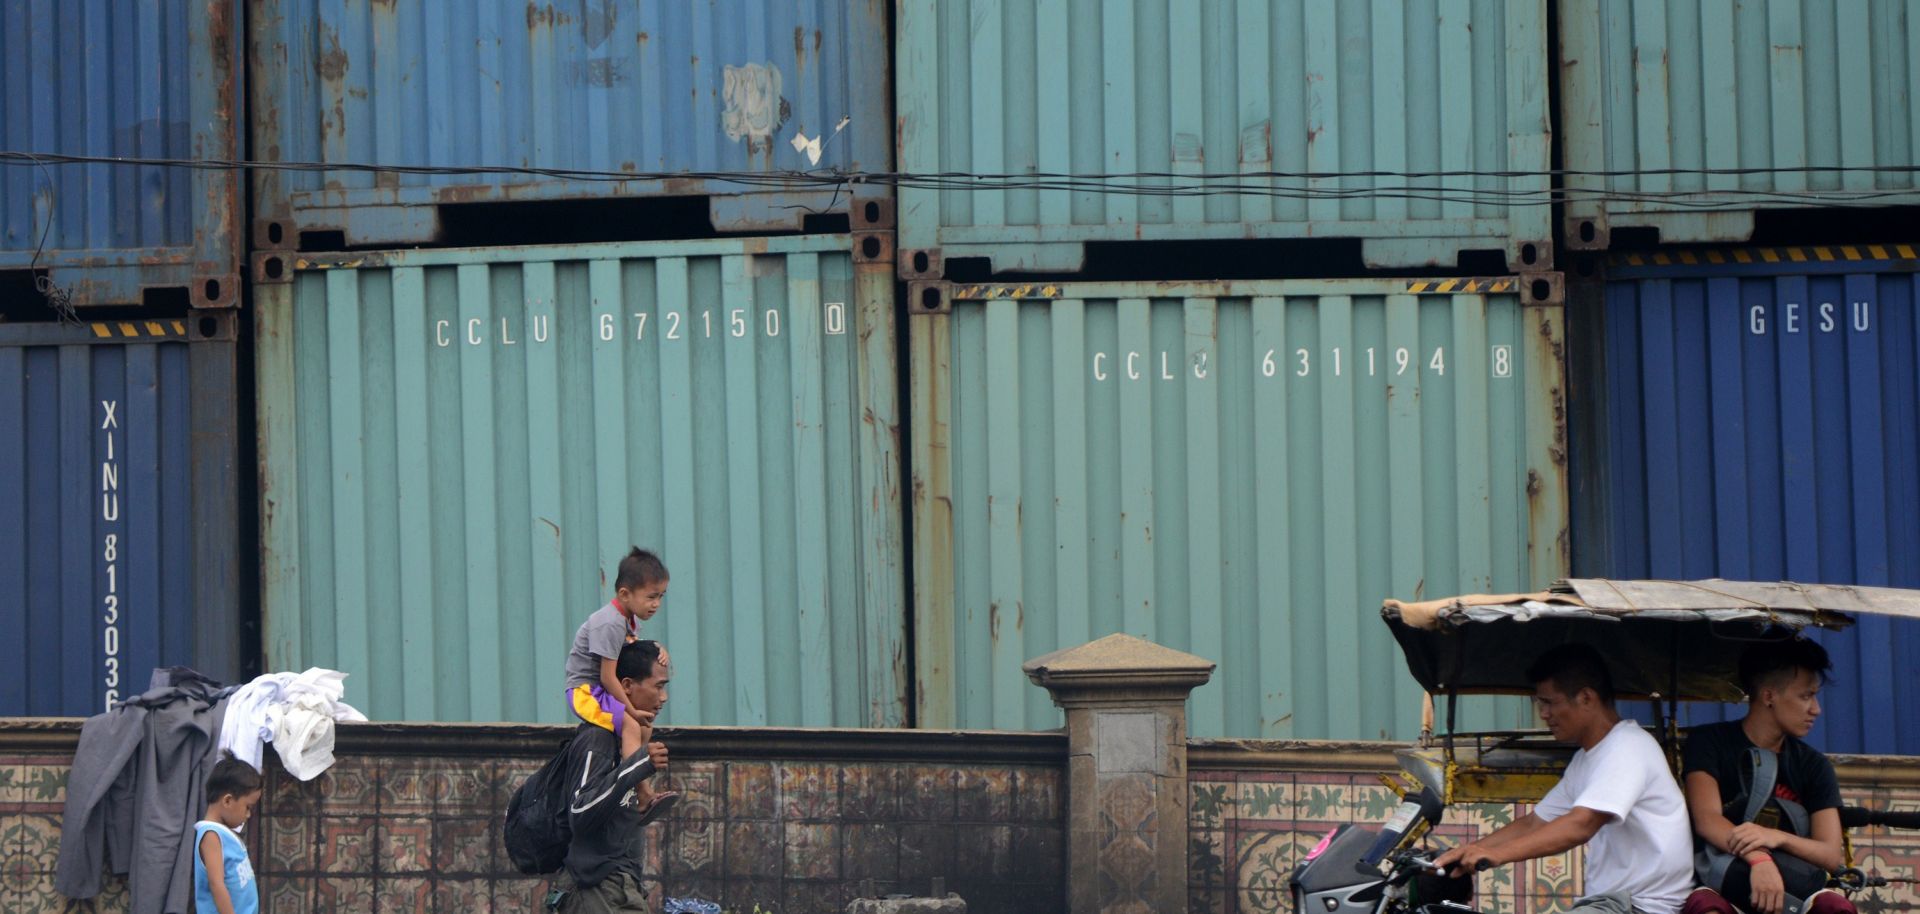 People pass a wall of shipping containers in Manila.